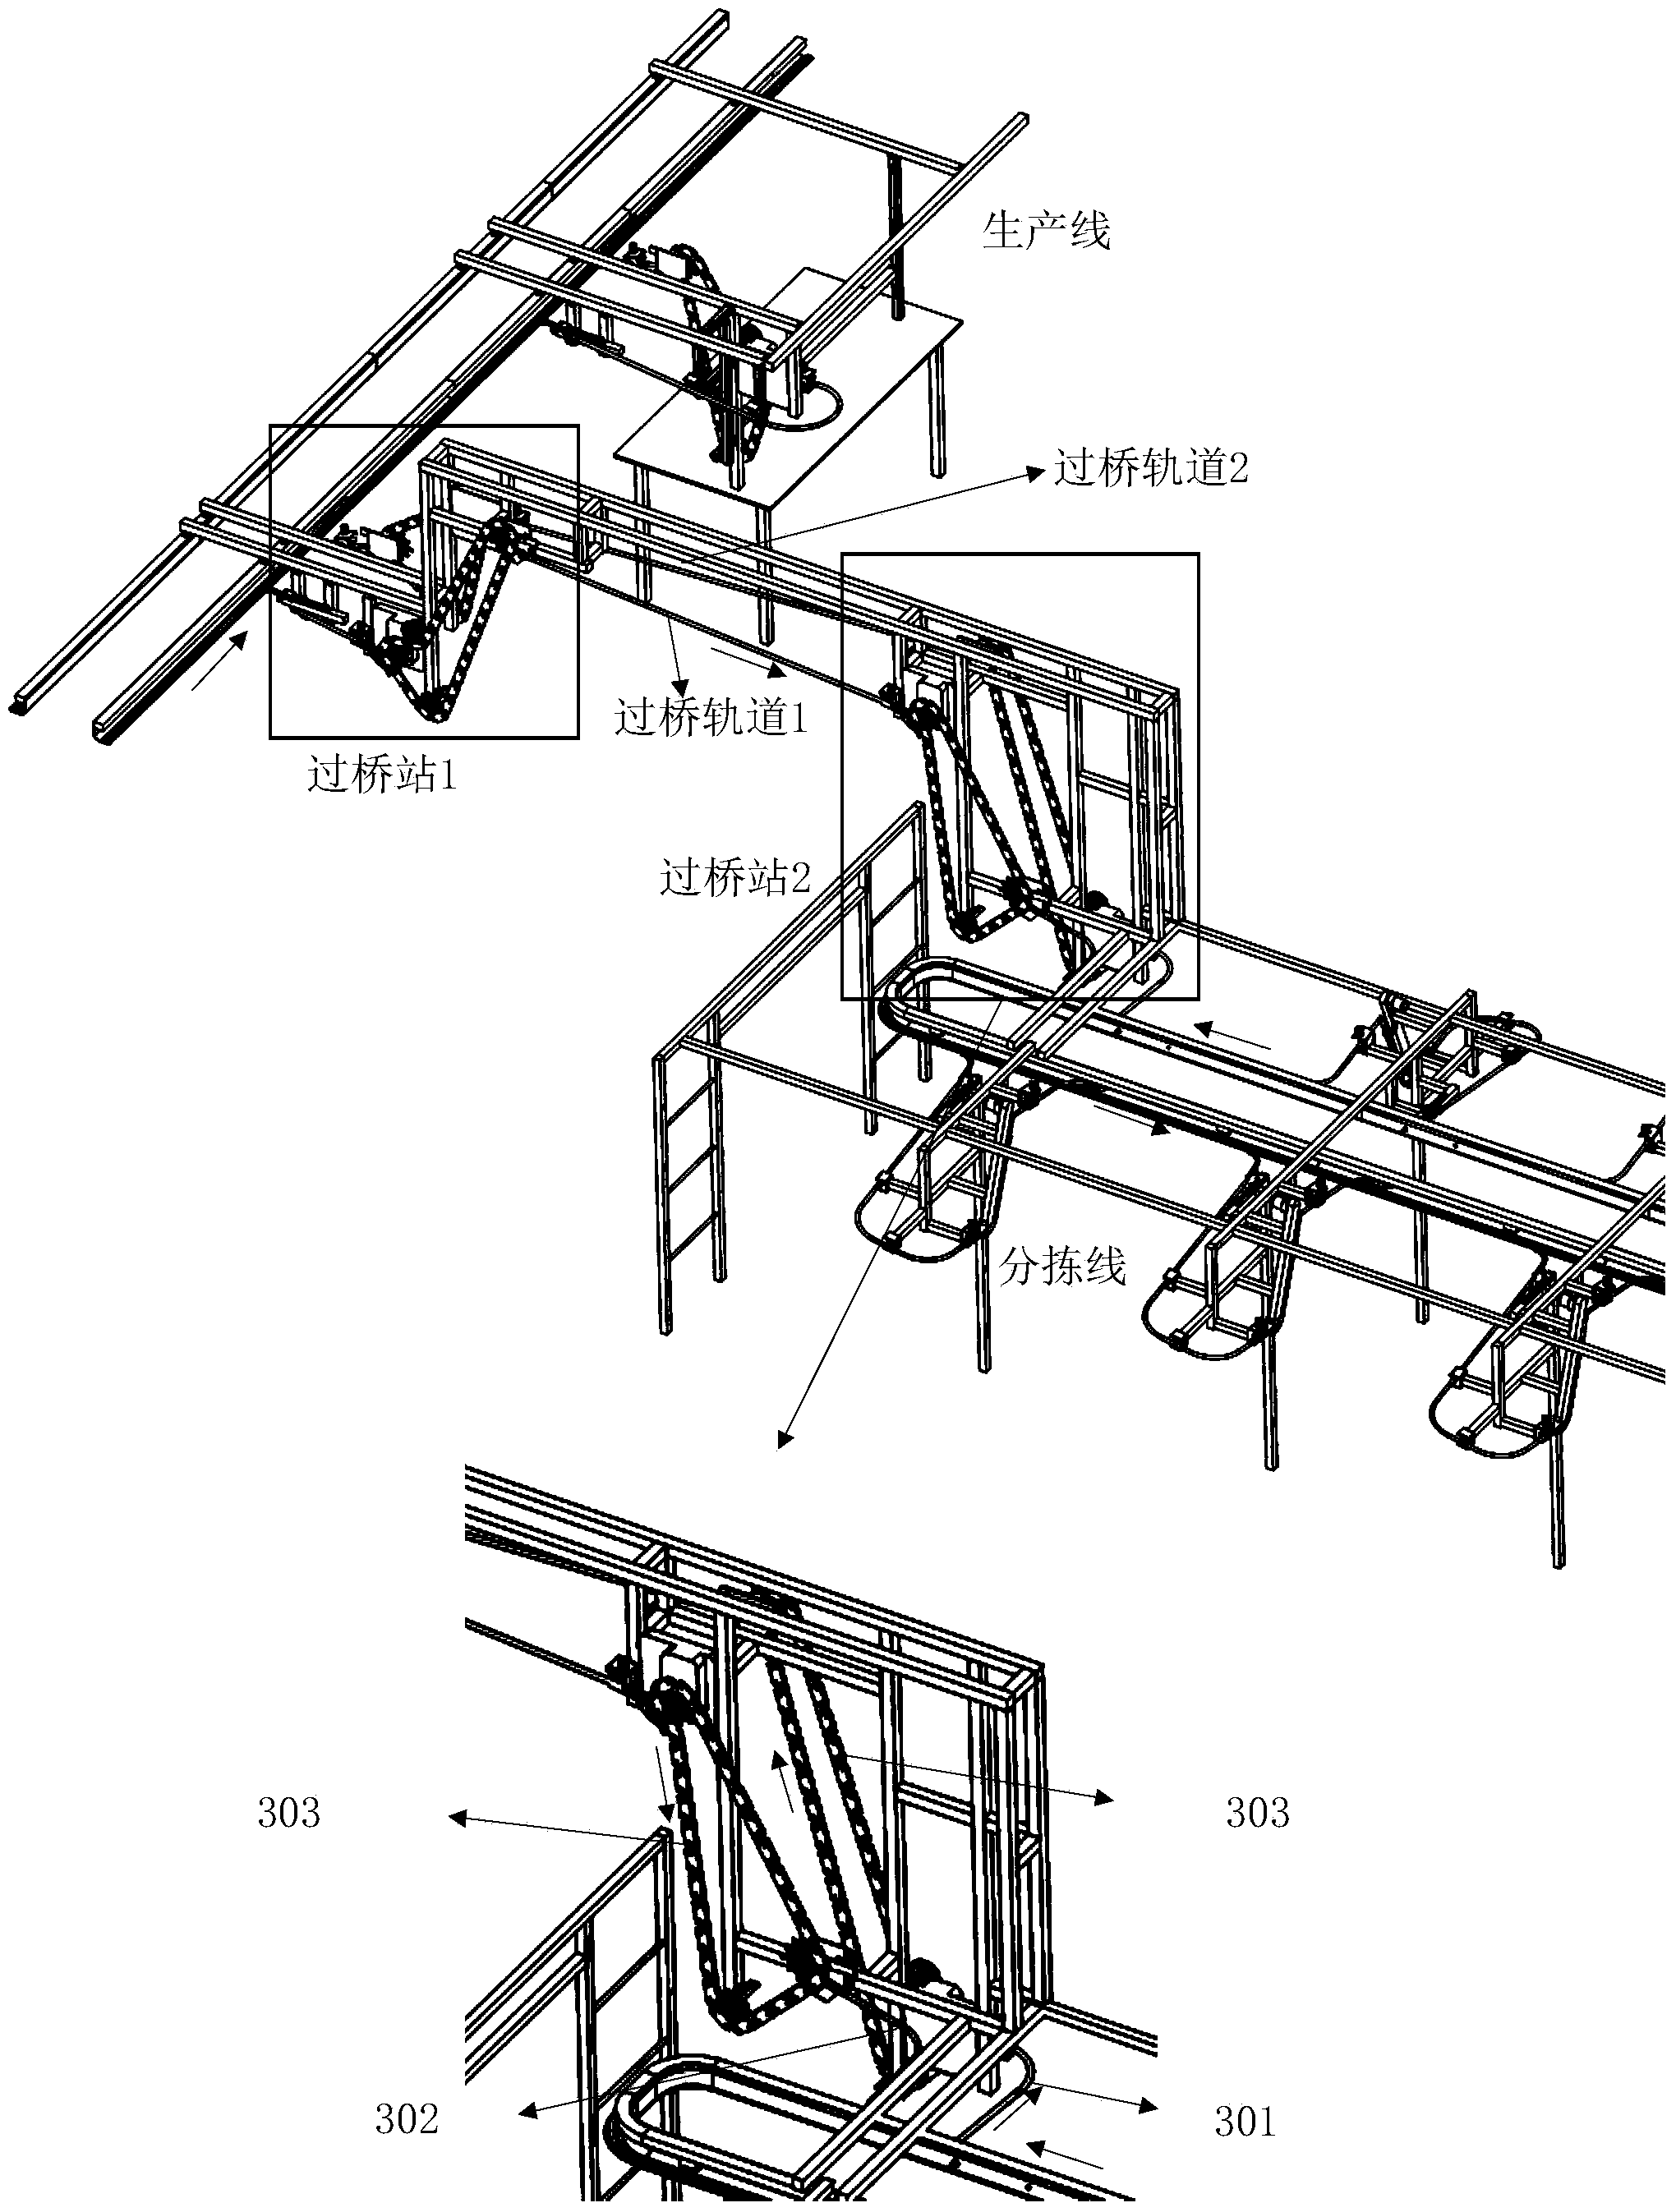 Automatic sorting system and method